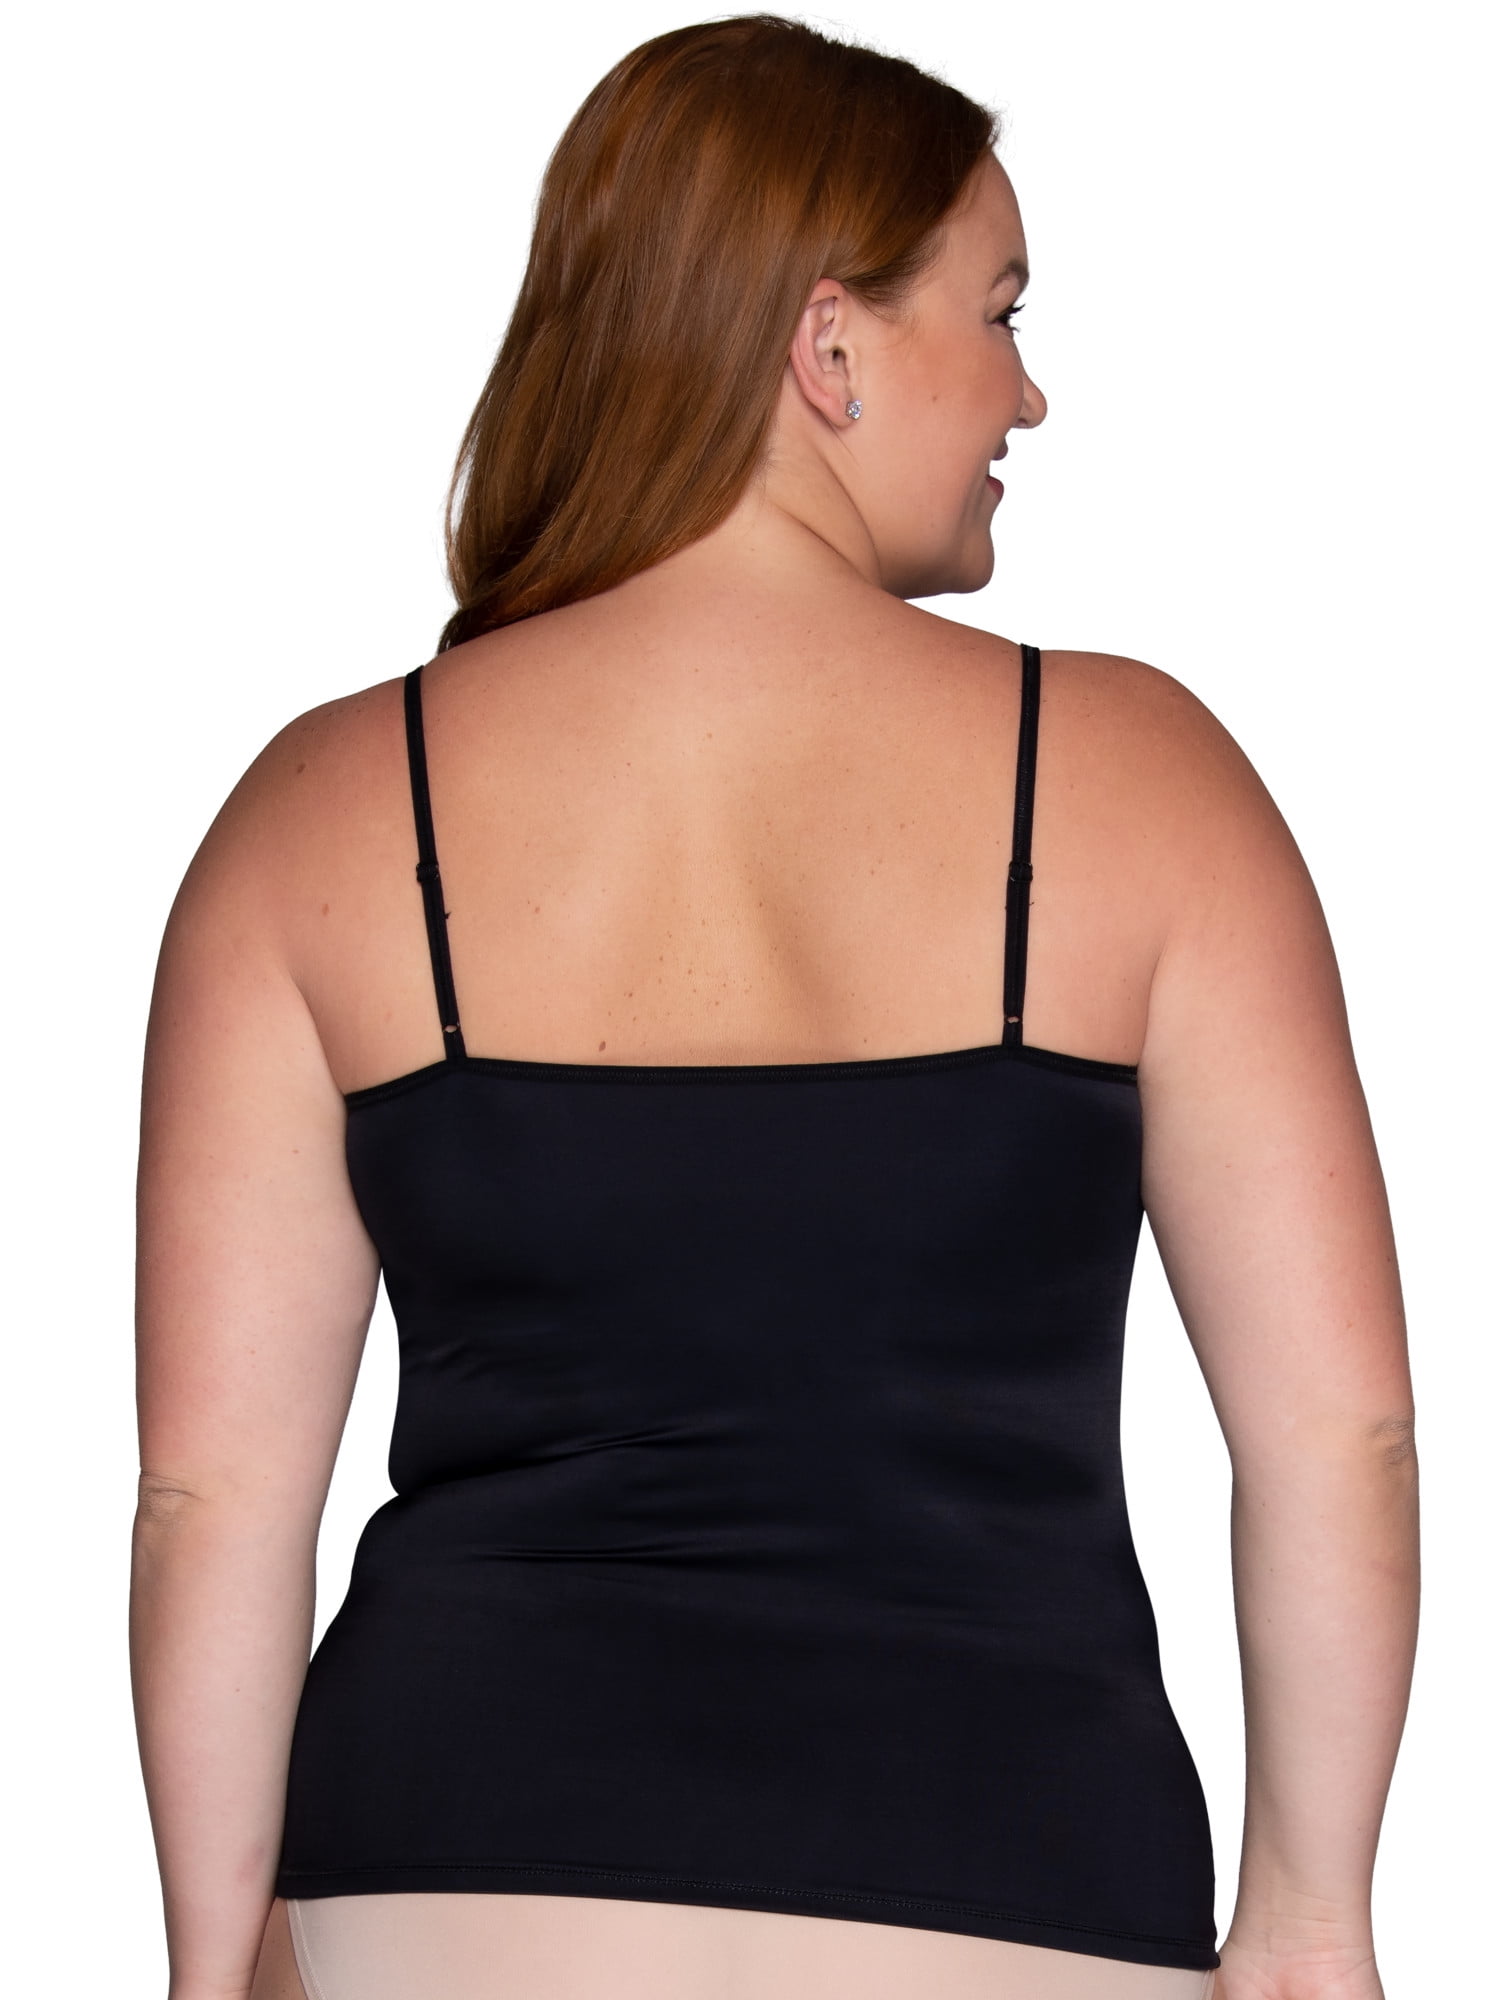 $40 to $60 Plus Size Camisoles by Vanity Fair